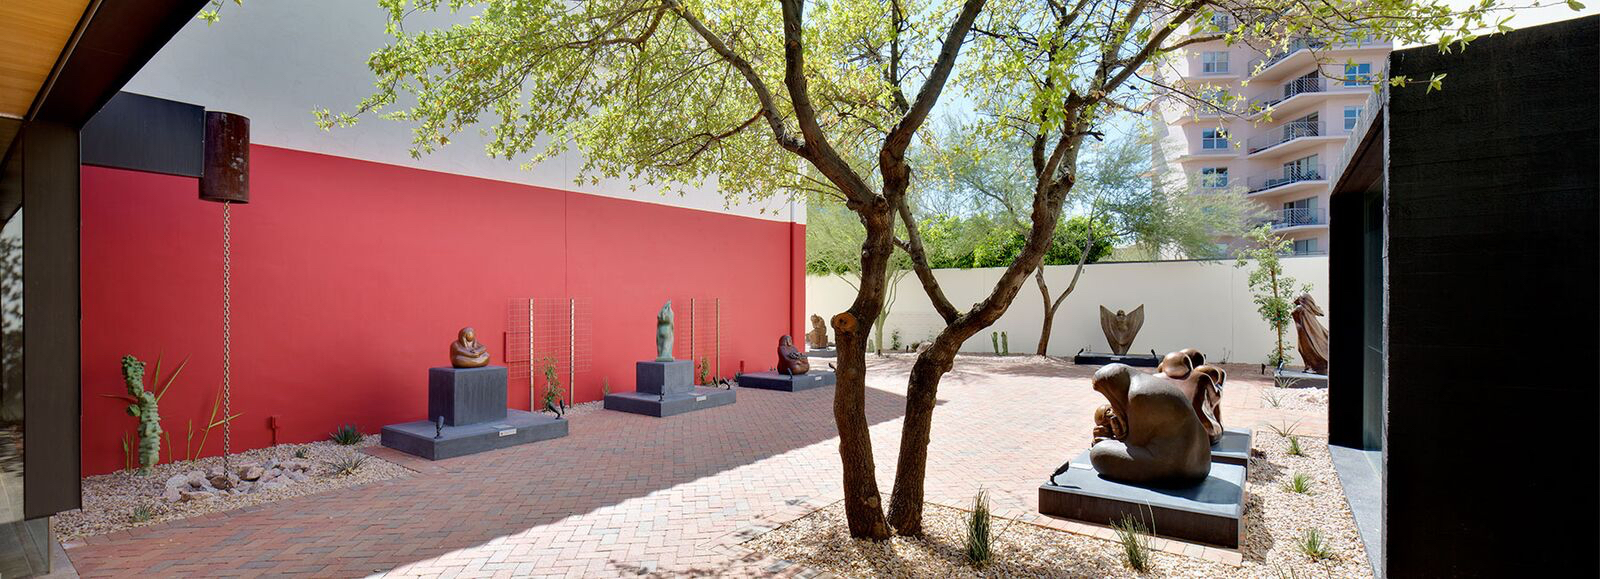 A courtyard with sculptures and a red wall.